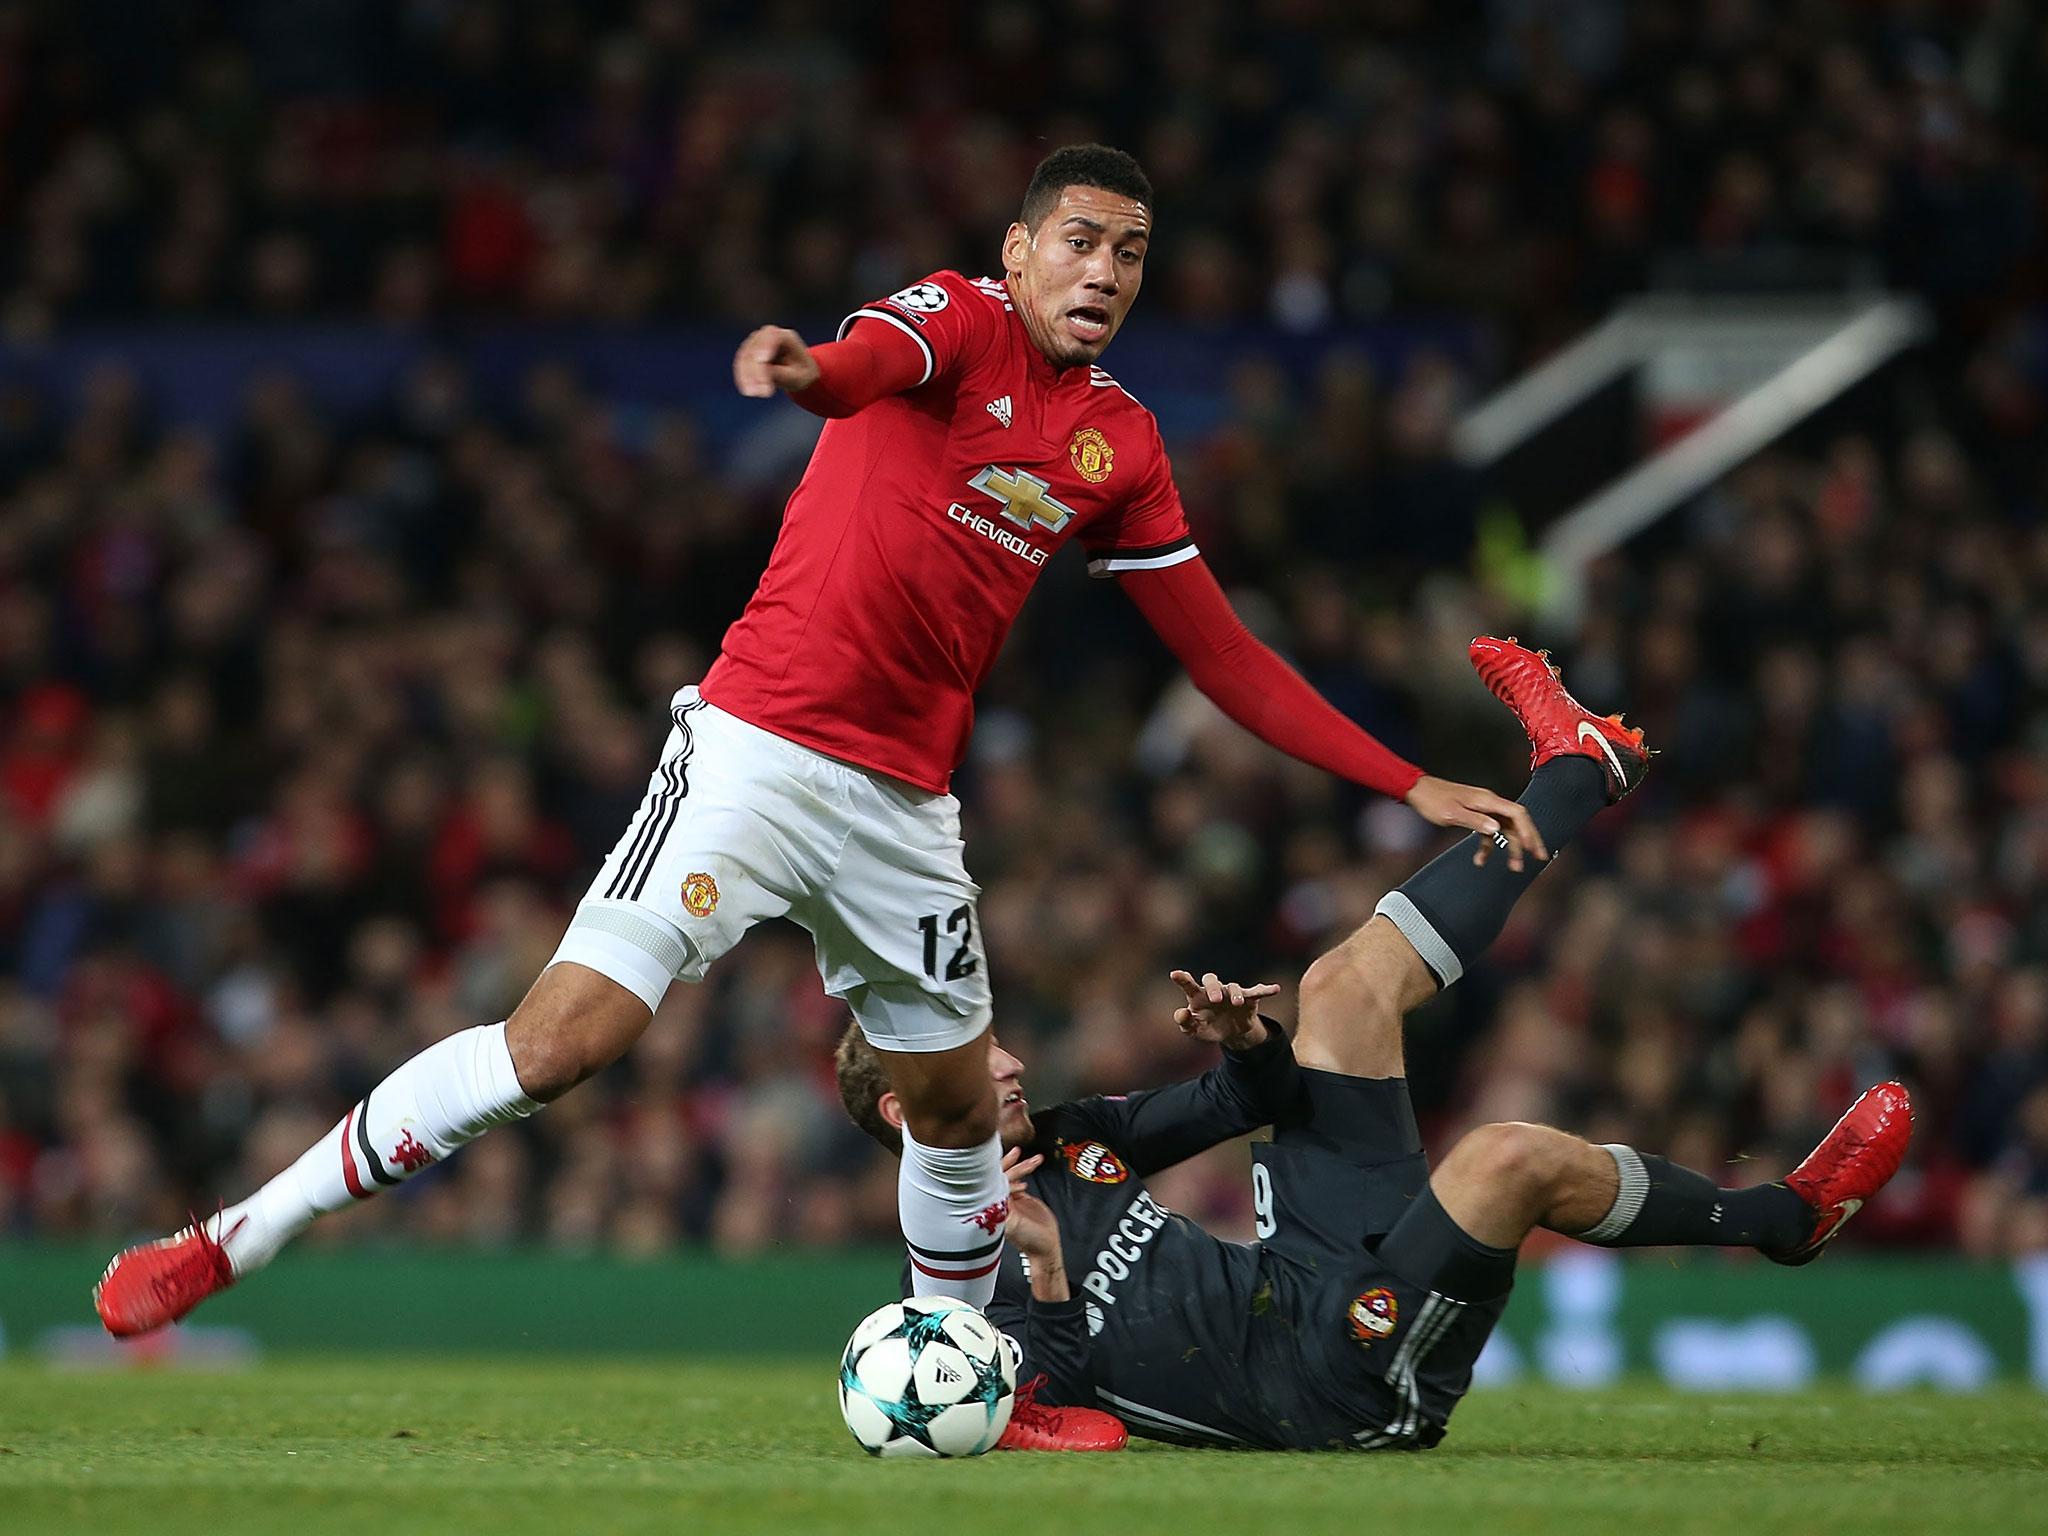 Chris Smalling brushes off a tackle to maintain possession (Getty)